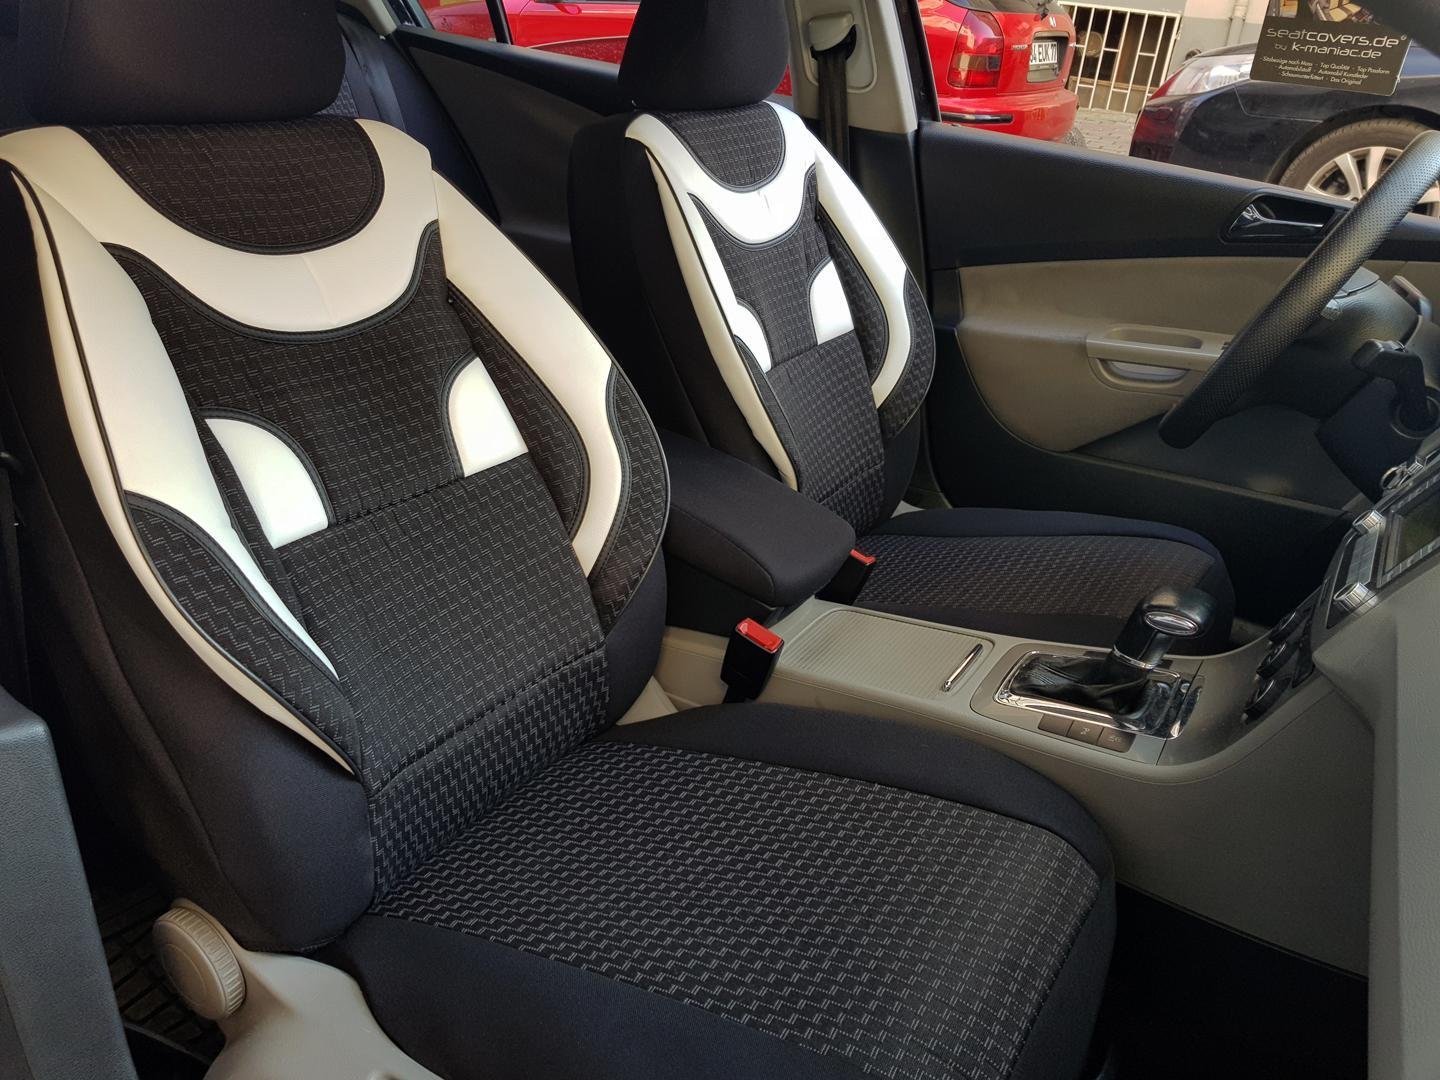 How To Make Car Seat Covers